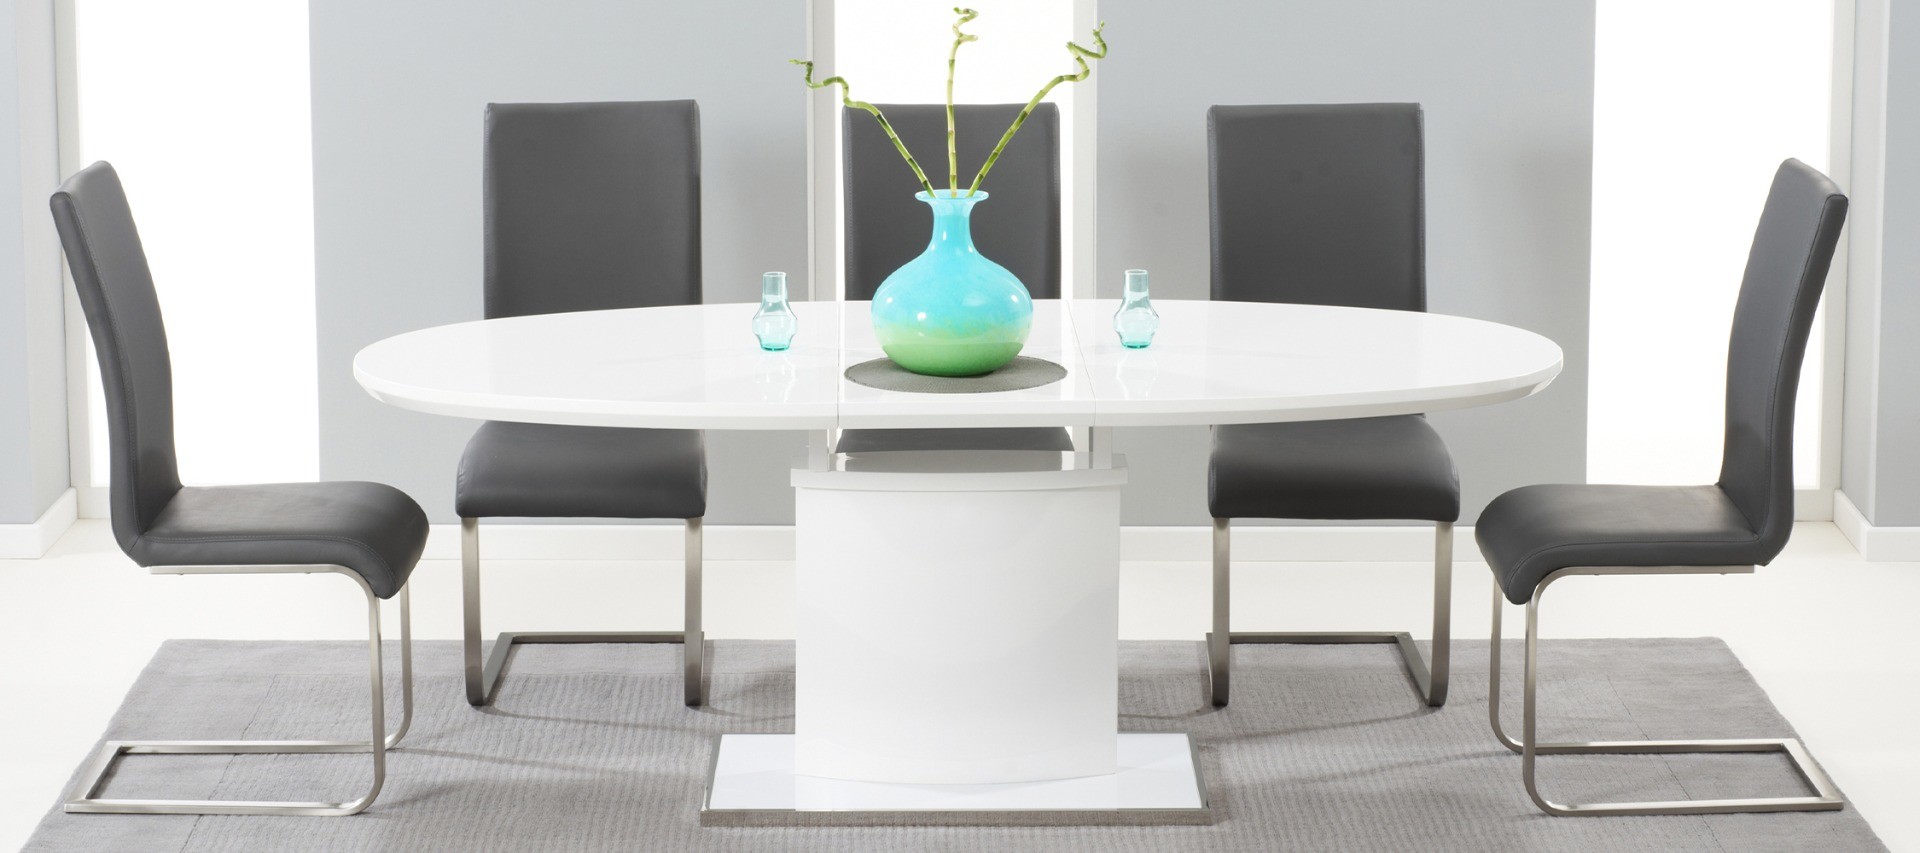 Photo 1 of Extending valzo 160cm white high gloss pedestal dining table with 6 grey austin chairs